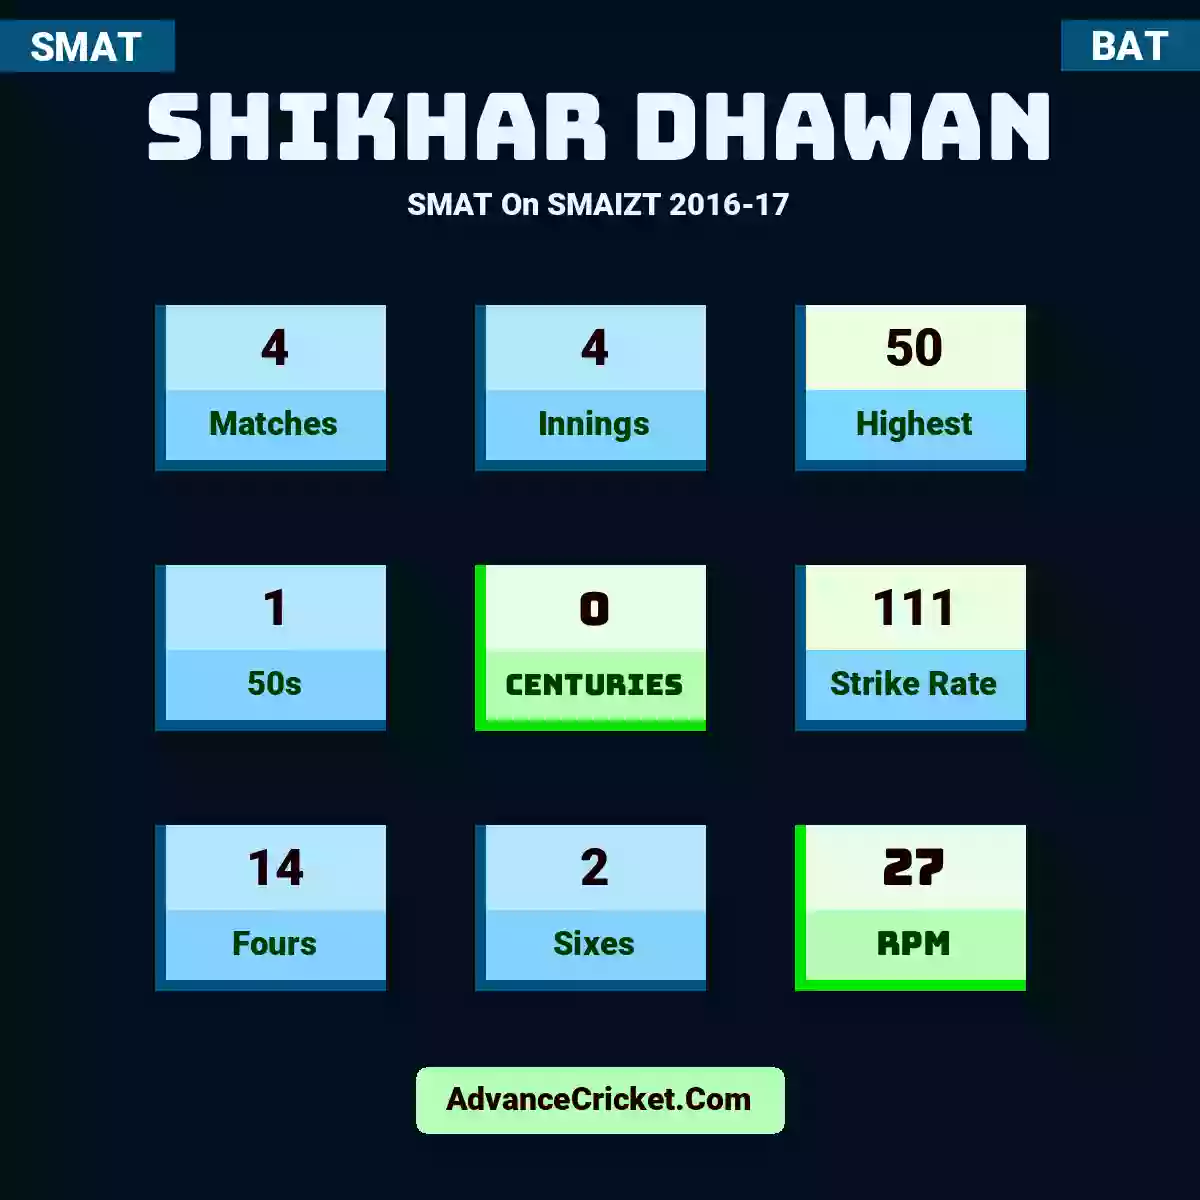 Shikhar Dhawan SMAT  On SMAIZT 2016-17, Shikhar Dhawan played 4 matches, scored 50 runs as highest, 1 half-centuries, and 0 centuries, with a strike rate of 111. S.Dhawan hit 14 fours and 2 sixes, with an RPM of 27.